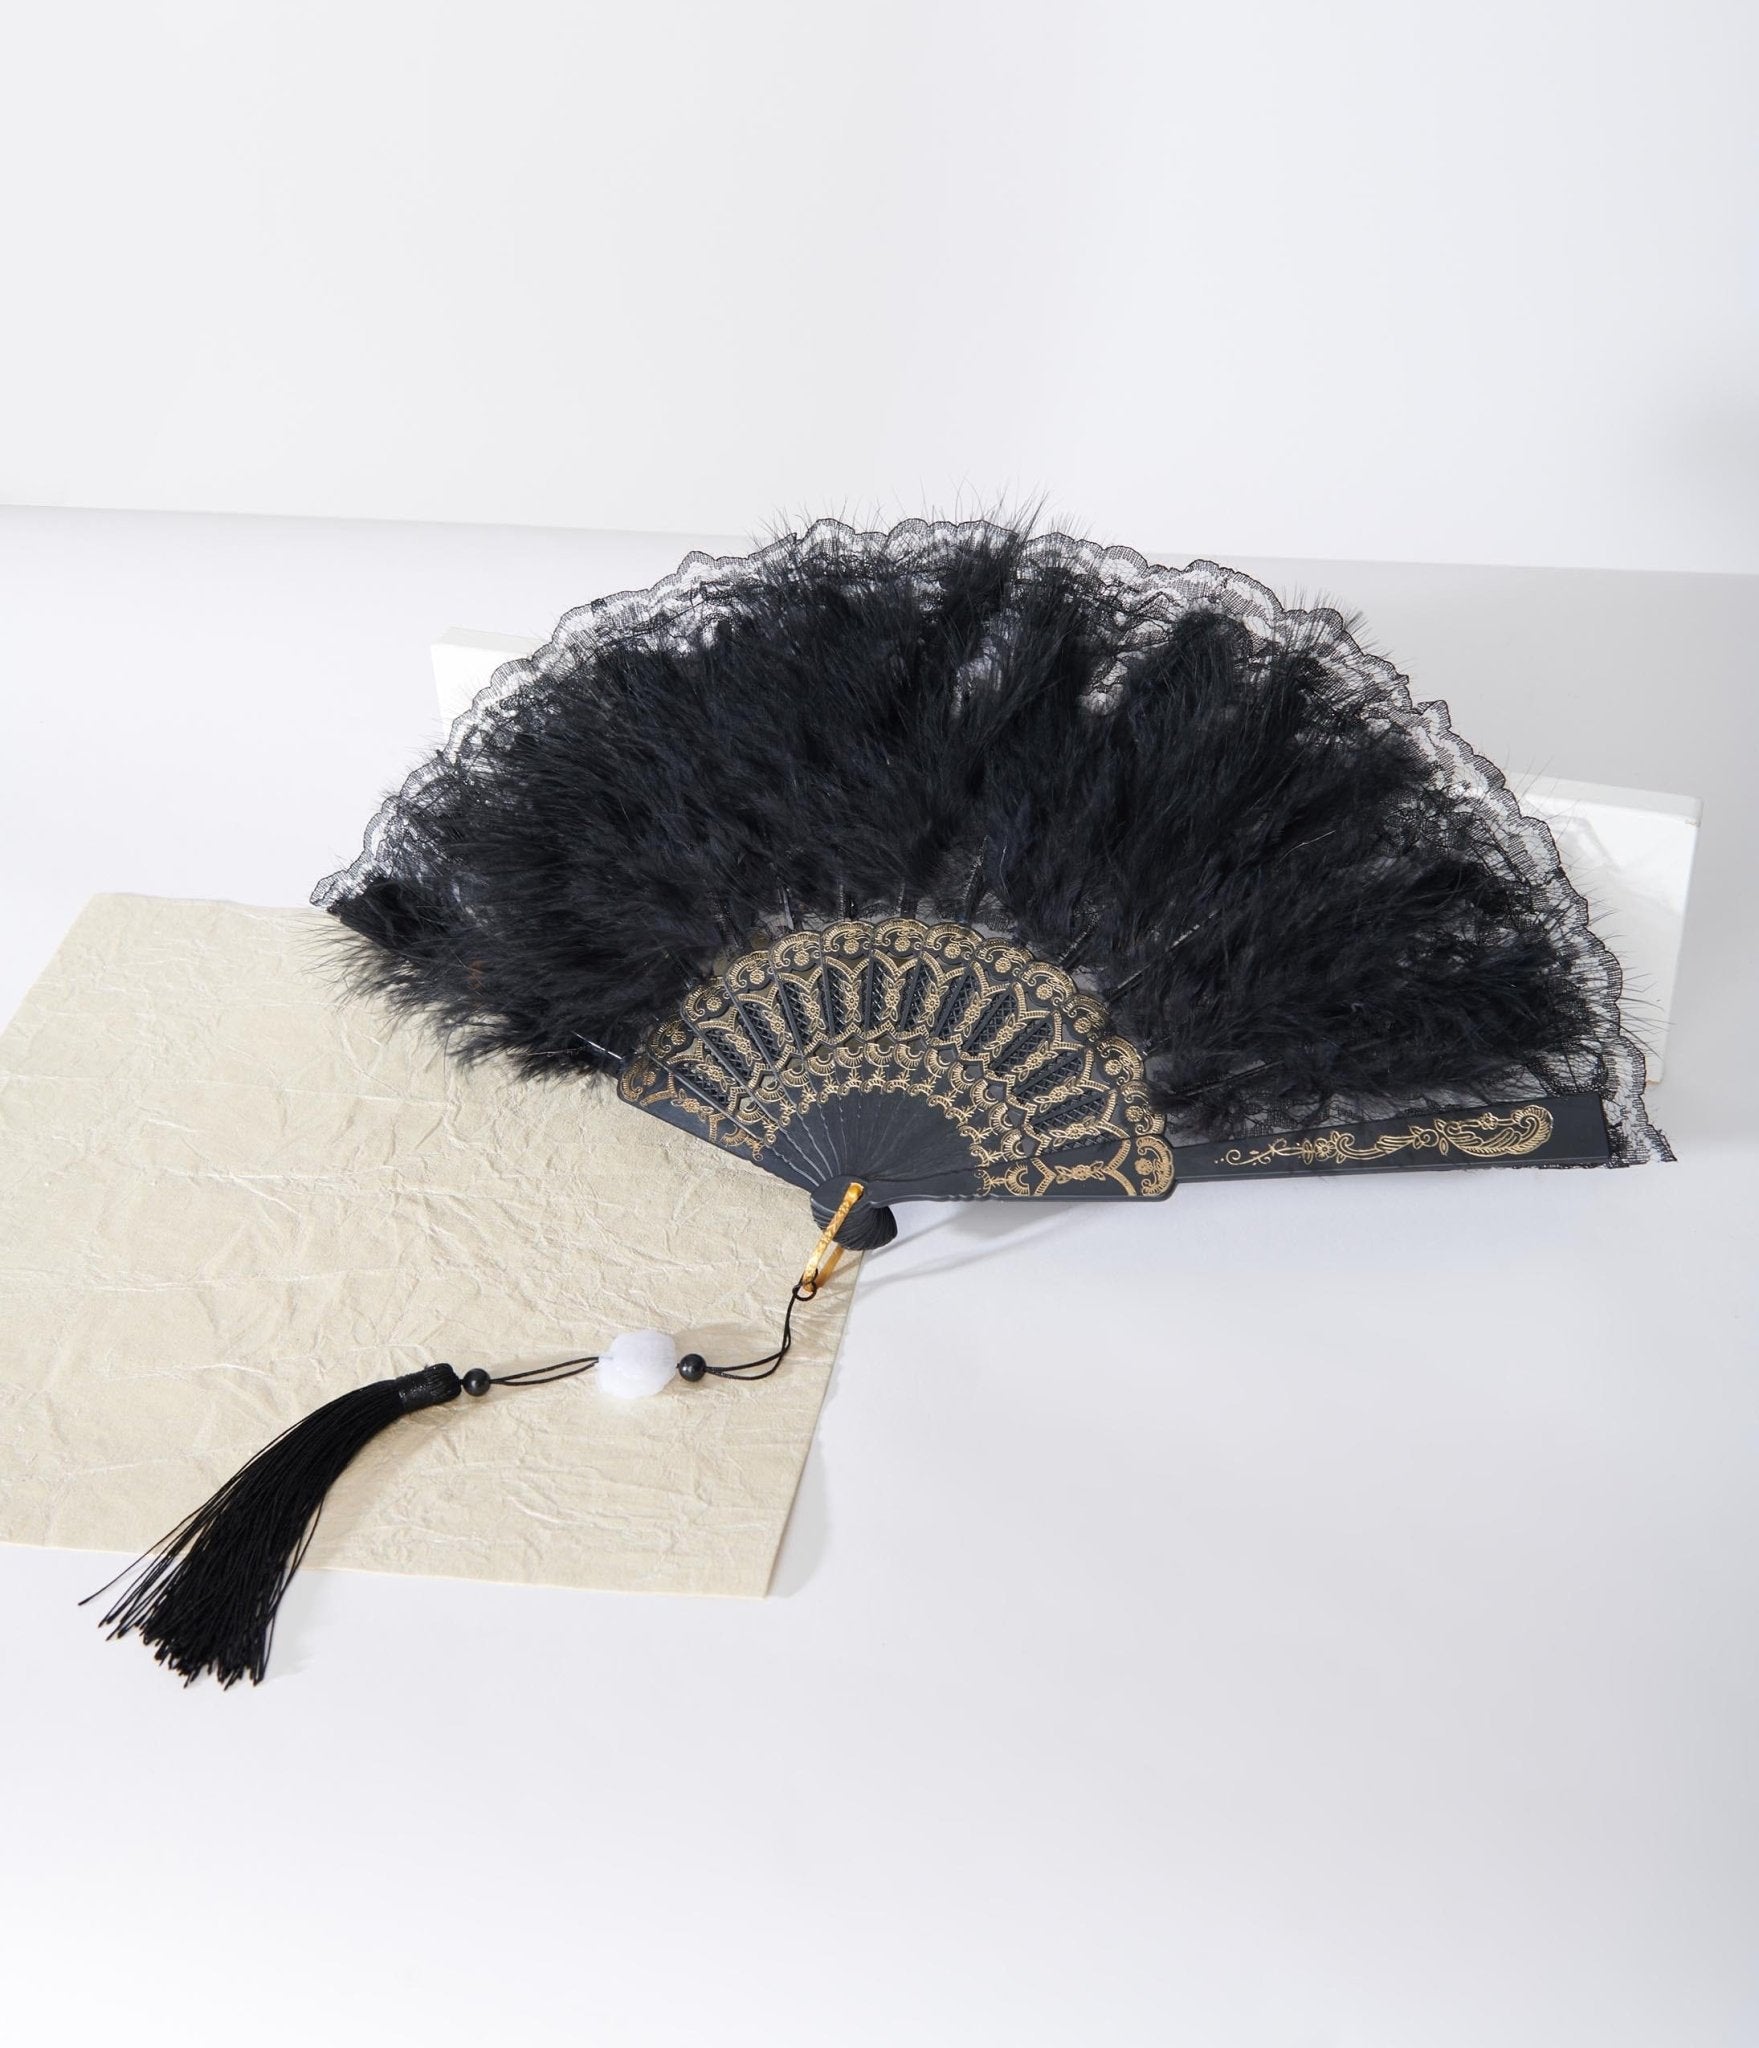 Black and White Feather Plumes Print - Capricorn Press